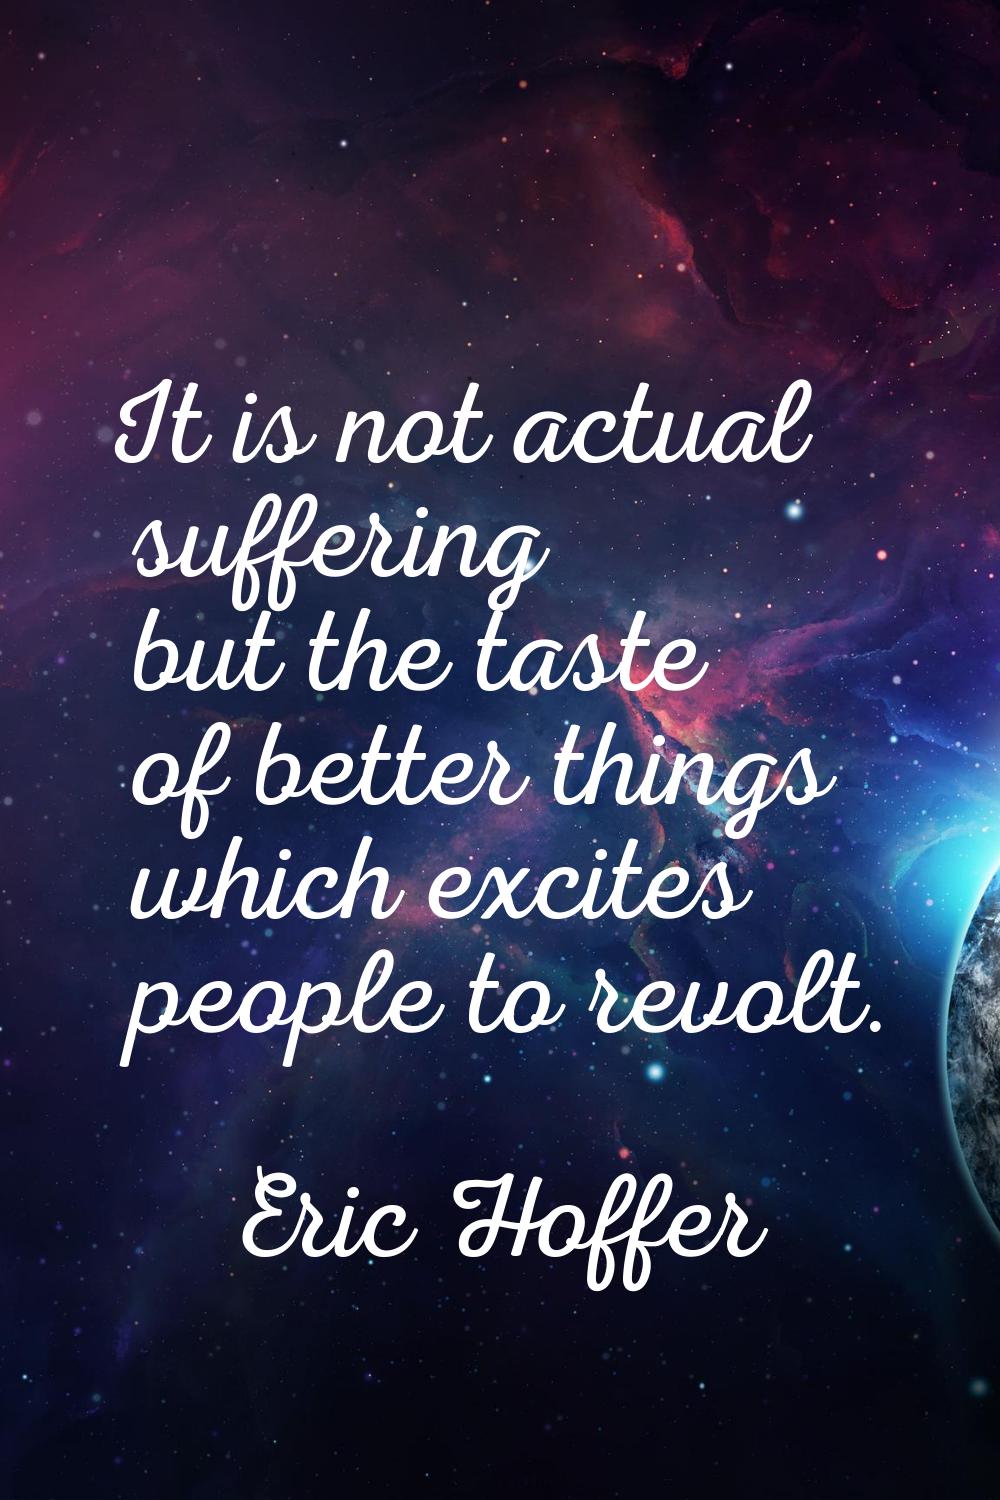 It is not actual suffering but the taste of better things which excites people to revolt.